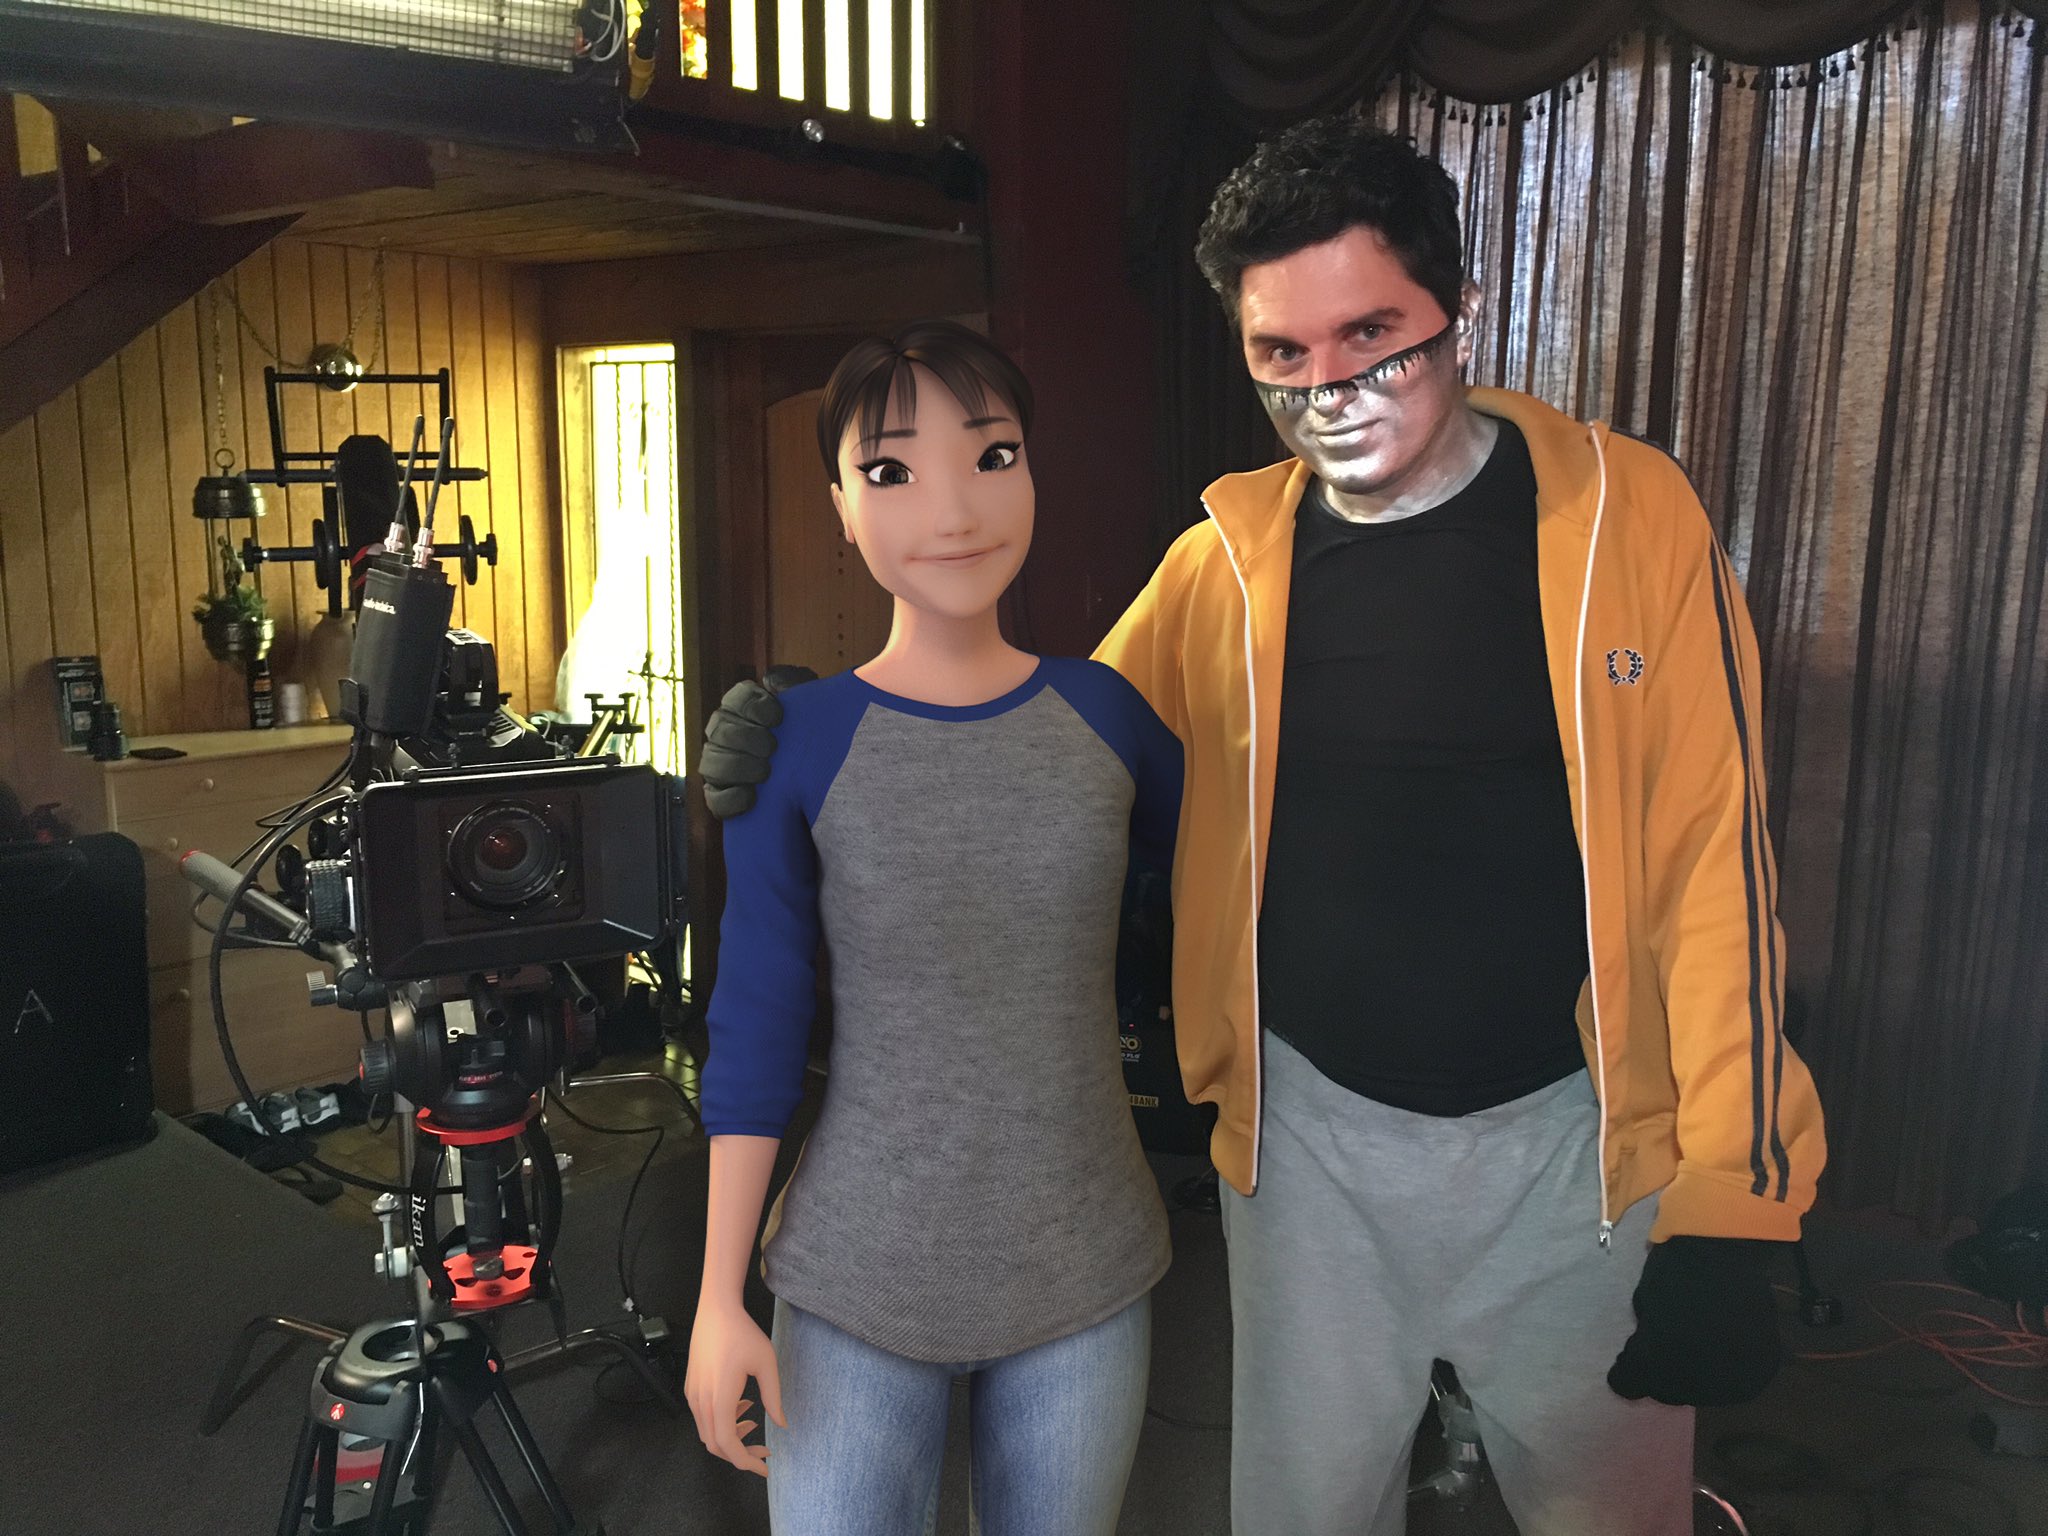 Captain Disillusion on Twitter: "@feureau @AmiYamato I'm 9 feet EVERYONE KNOWS THIS." / Twitter